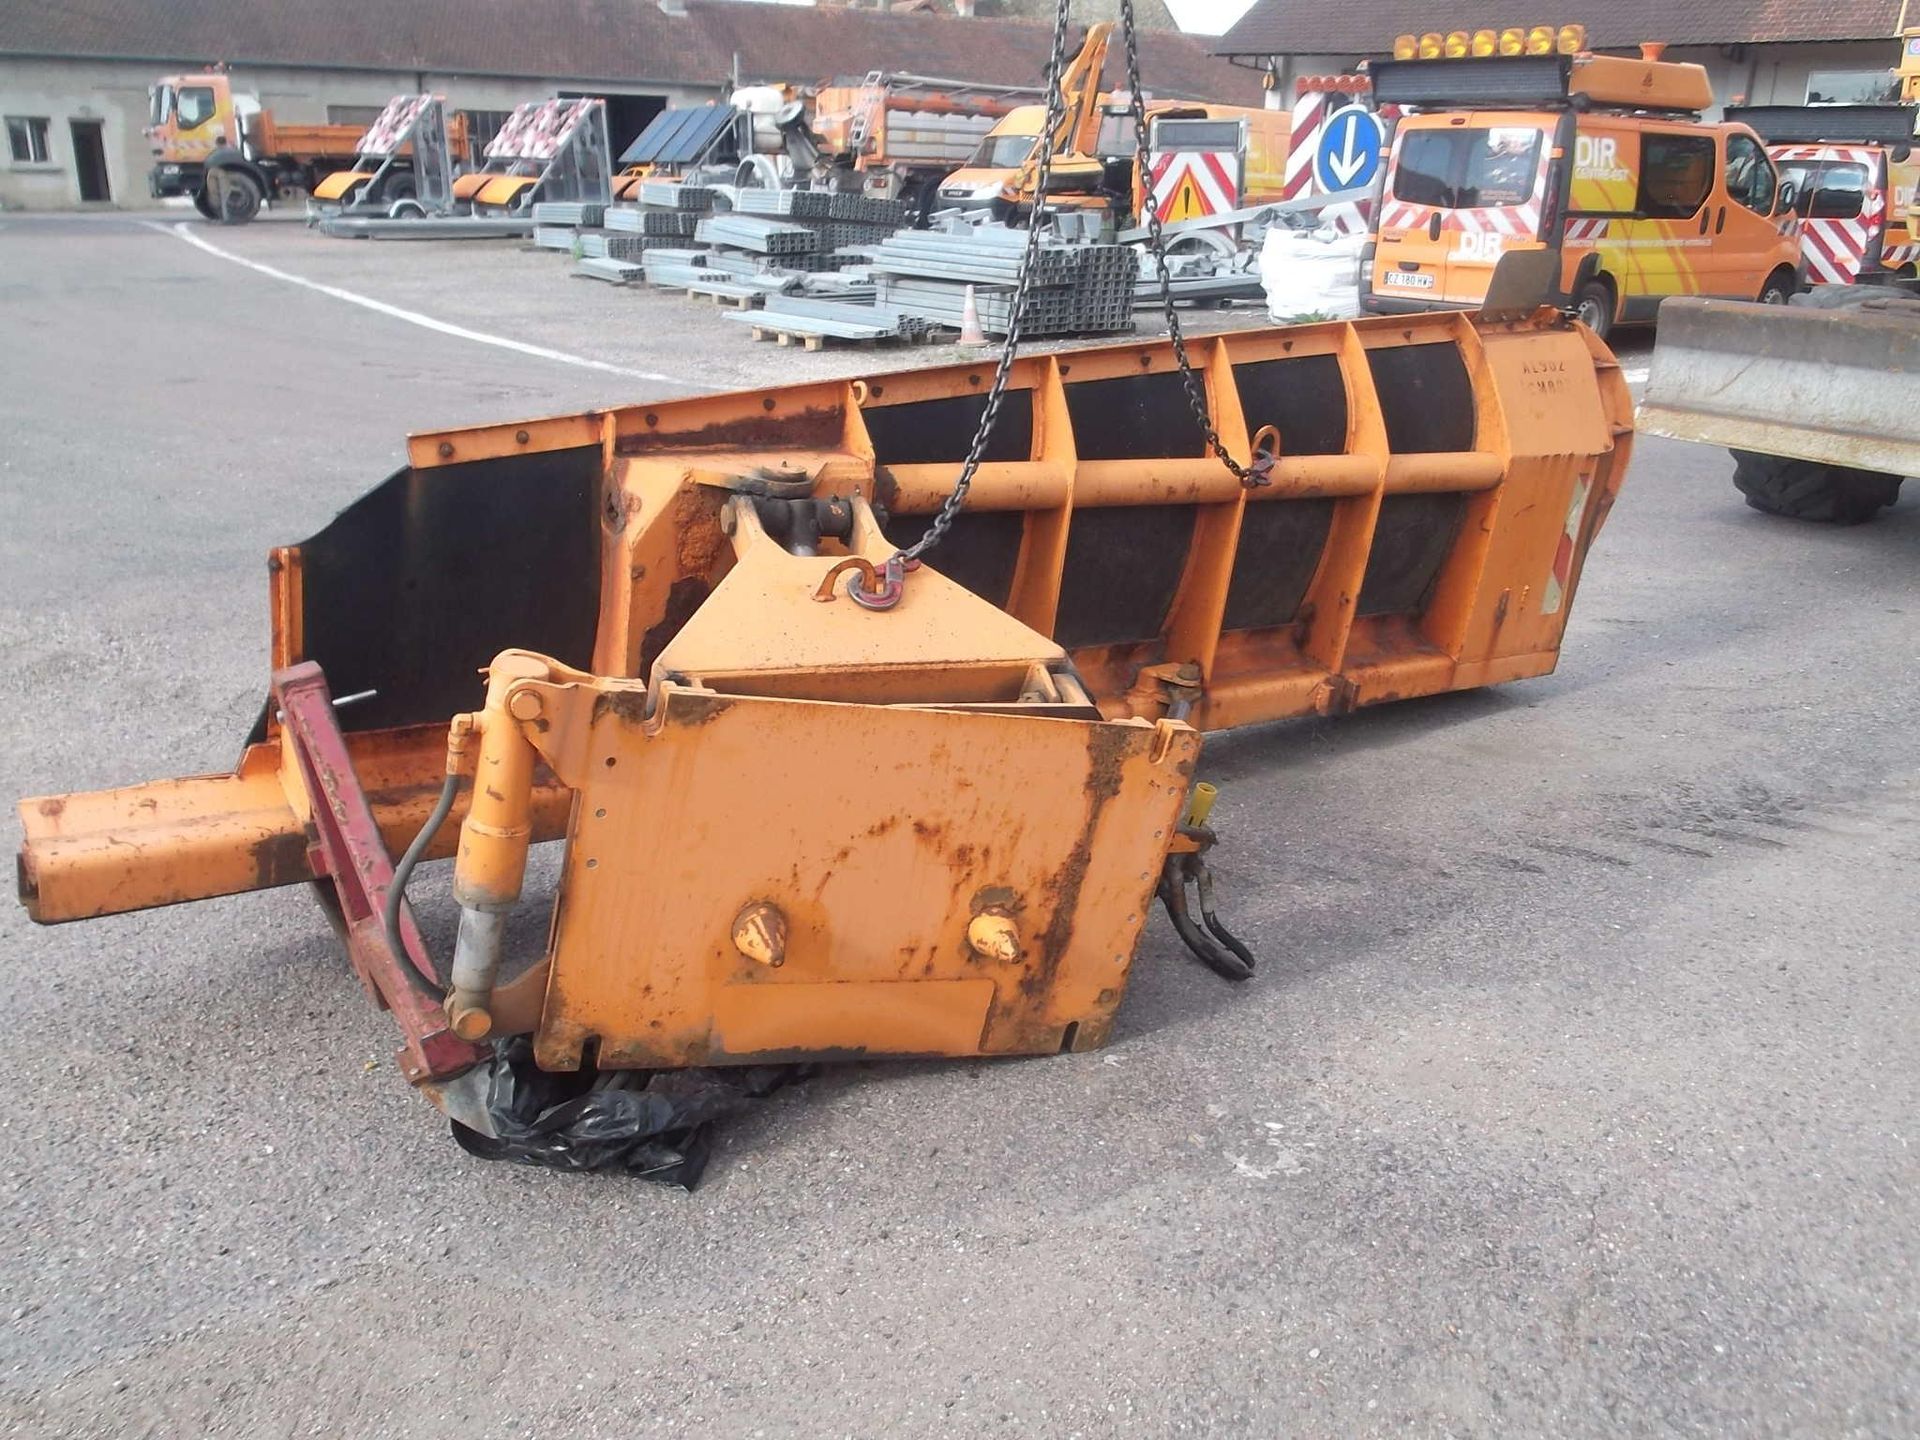 Null DIC 1ALD snowplough, put into service 13/12/89. Handling at the charge of t&hellip;